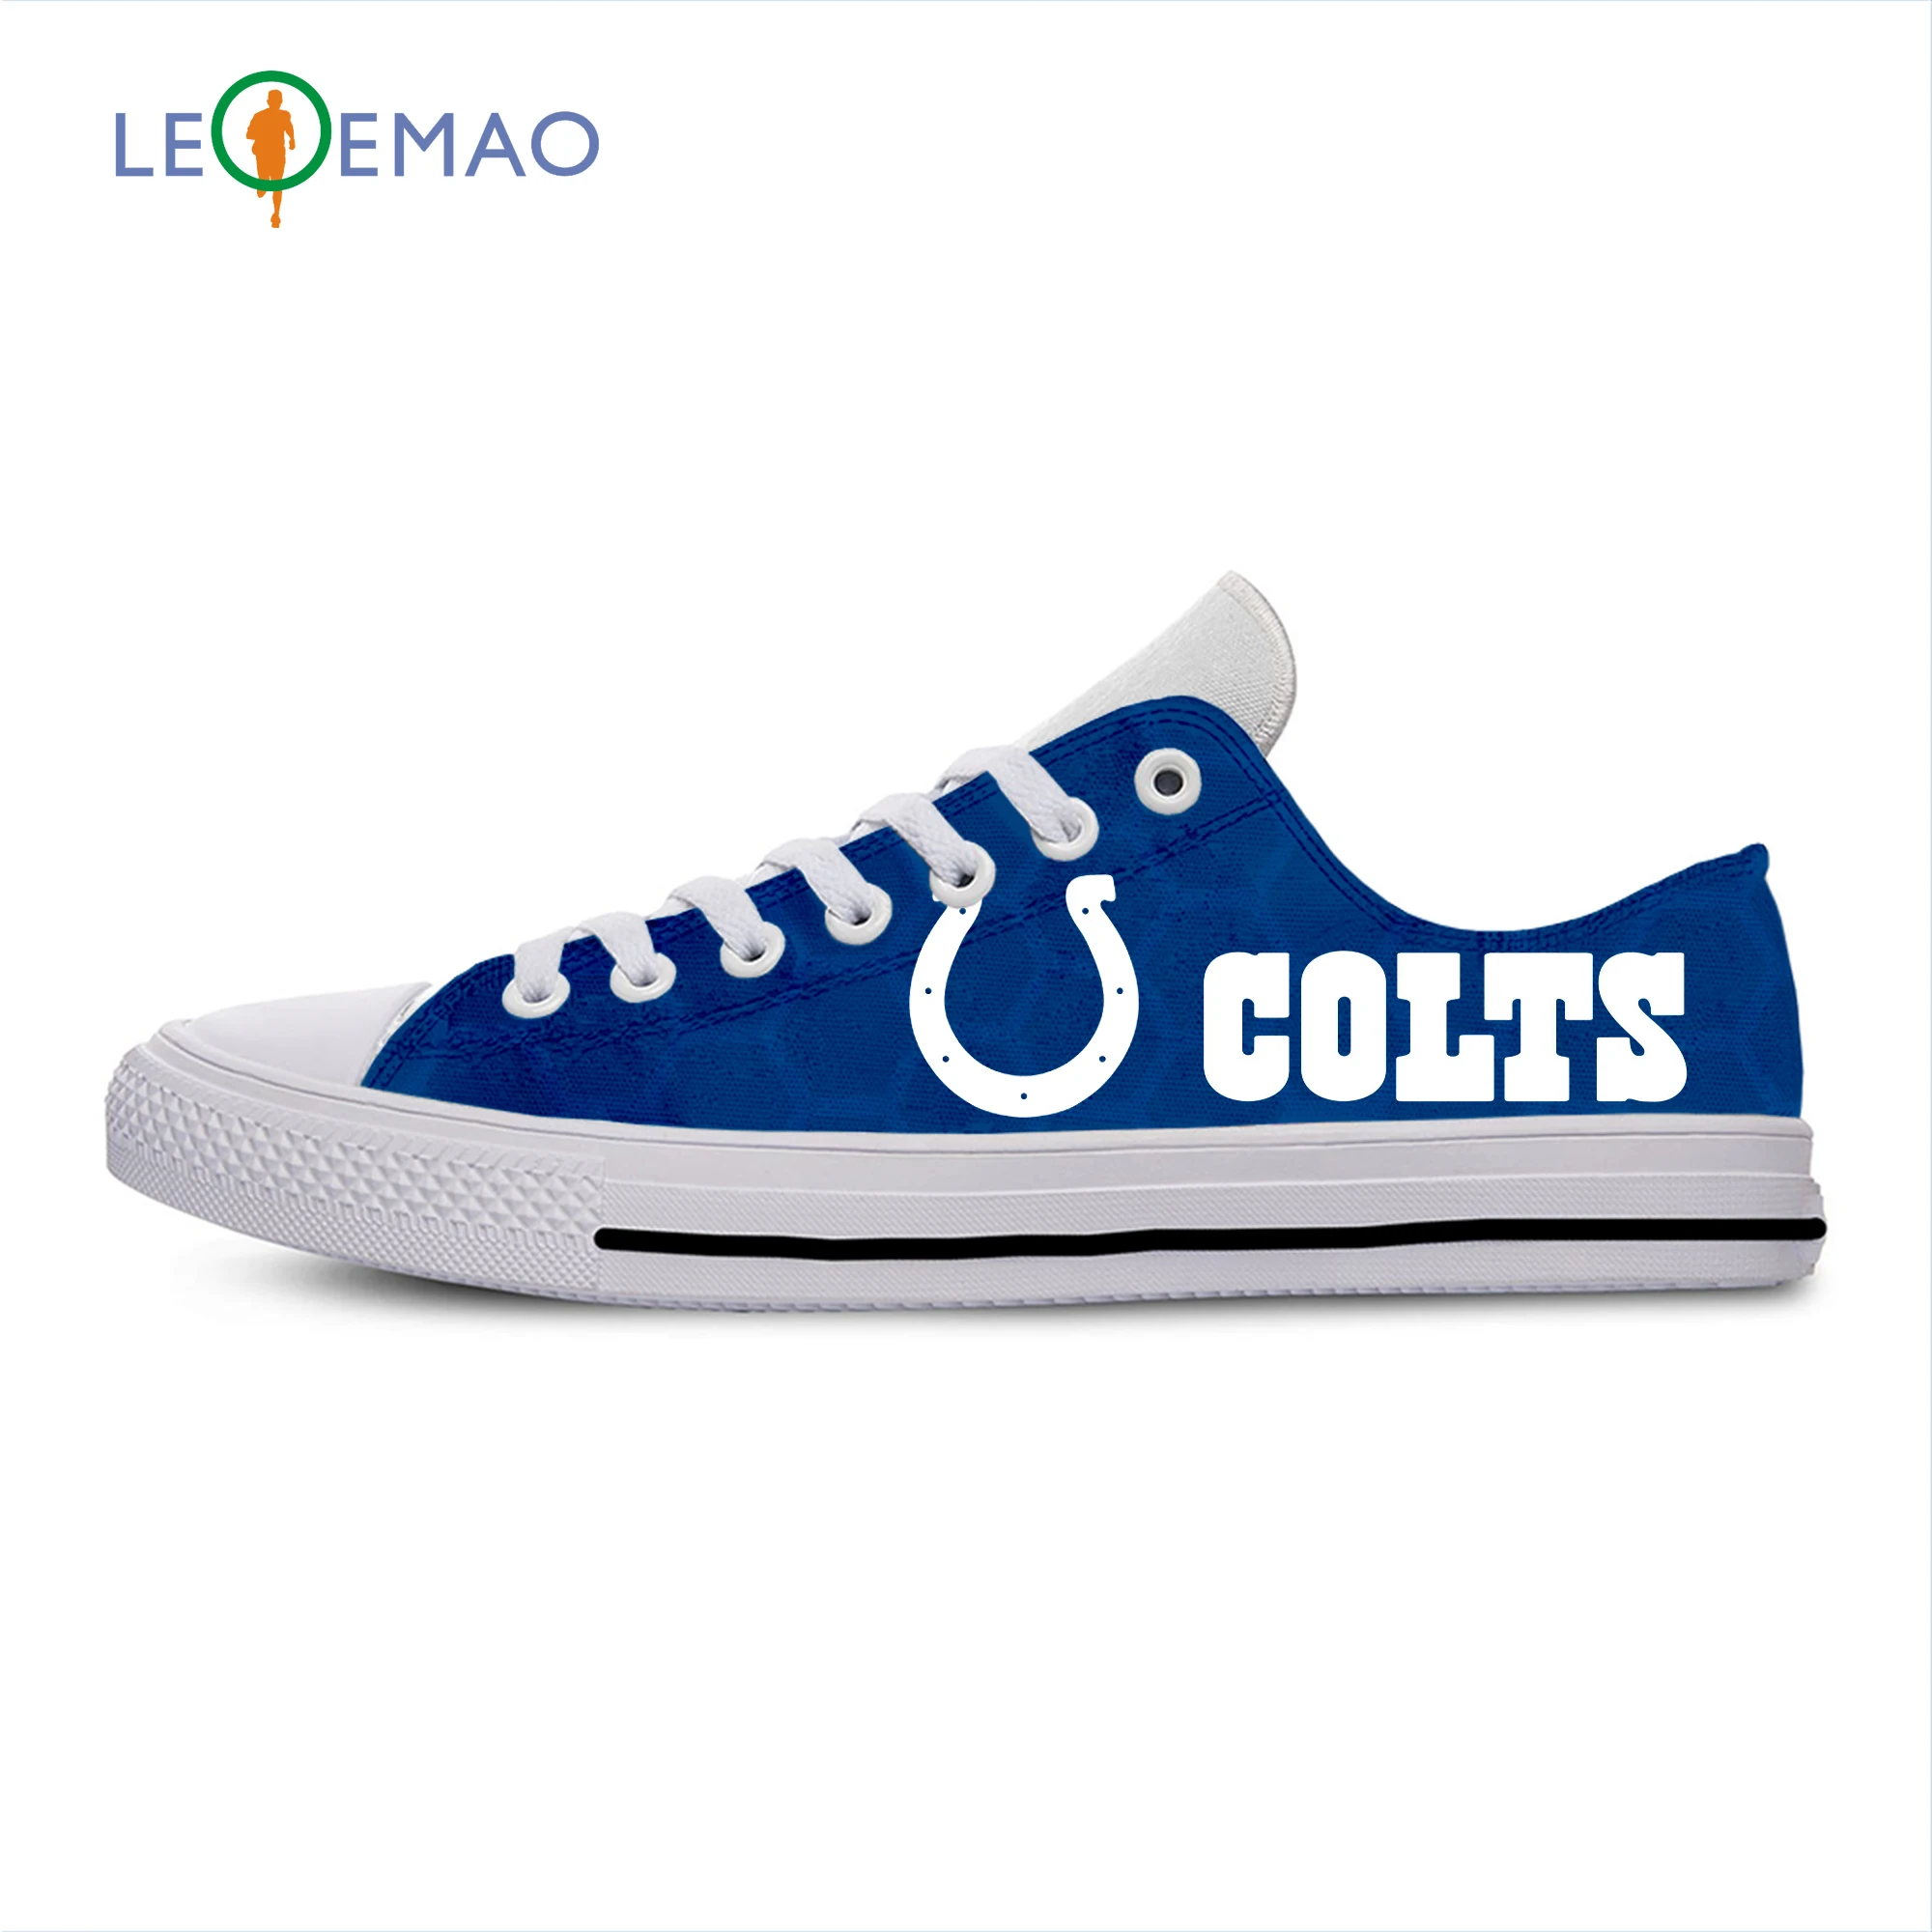 

DIY Shoes Customized Colts Image Logo Canvas Shoes Sneakers for Women Men Teenagers Casual Indianapolis Fans Shoes